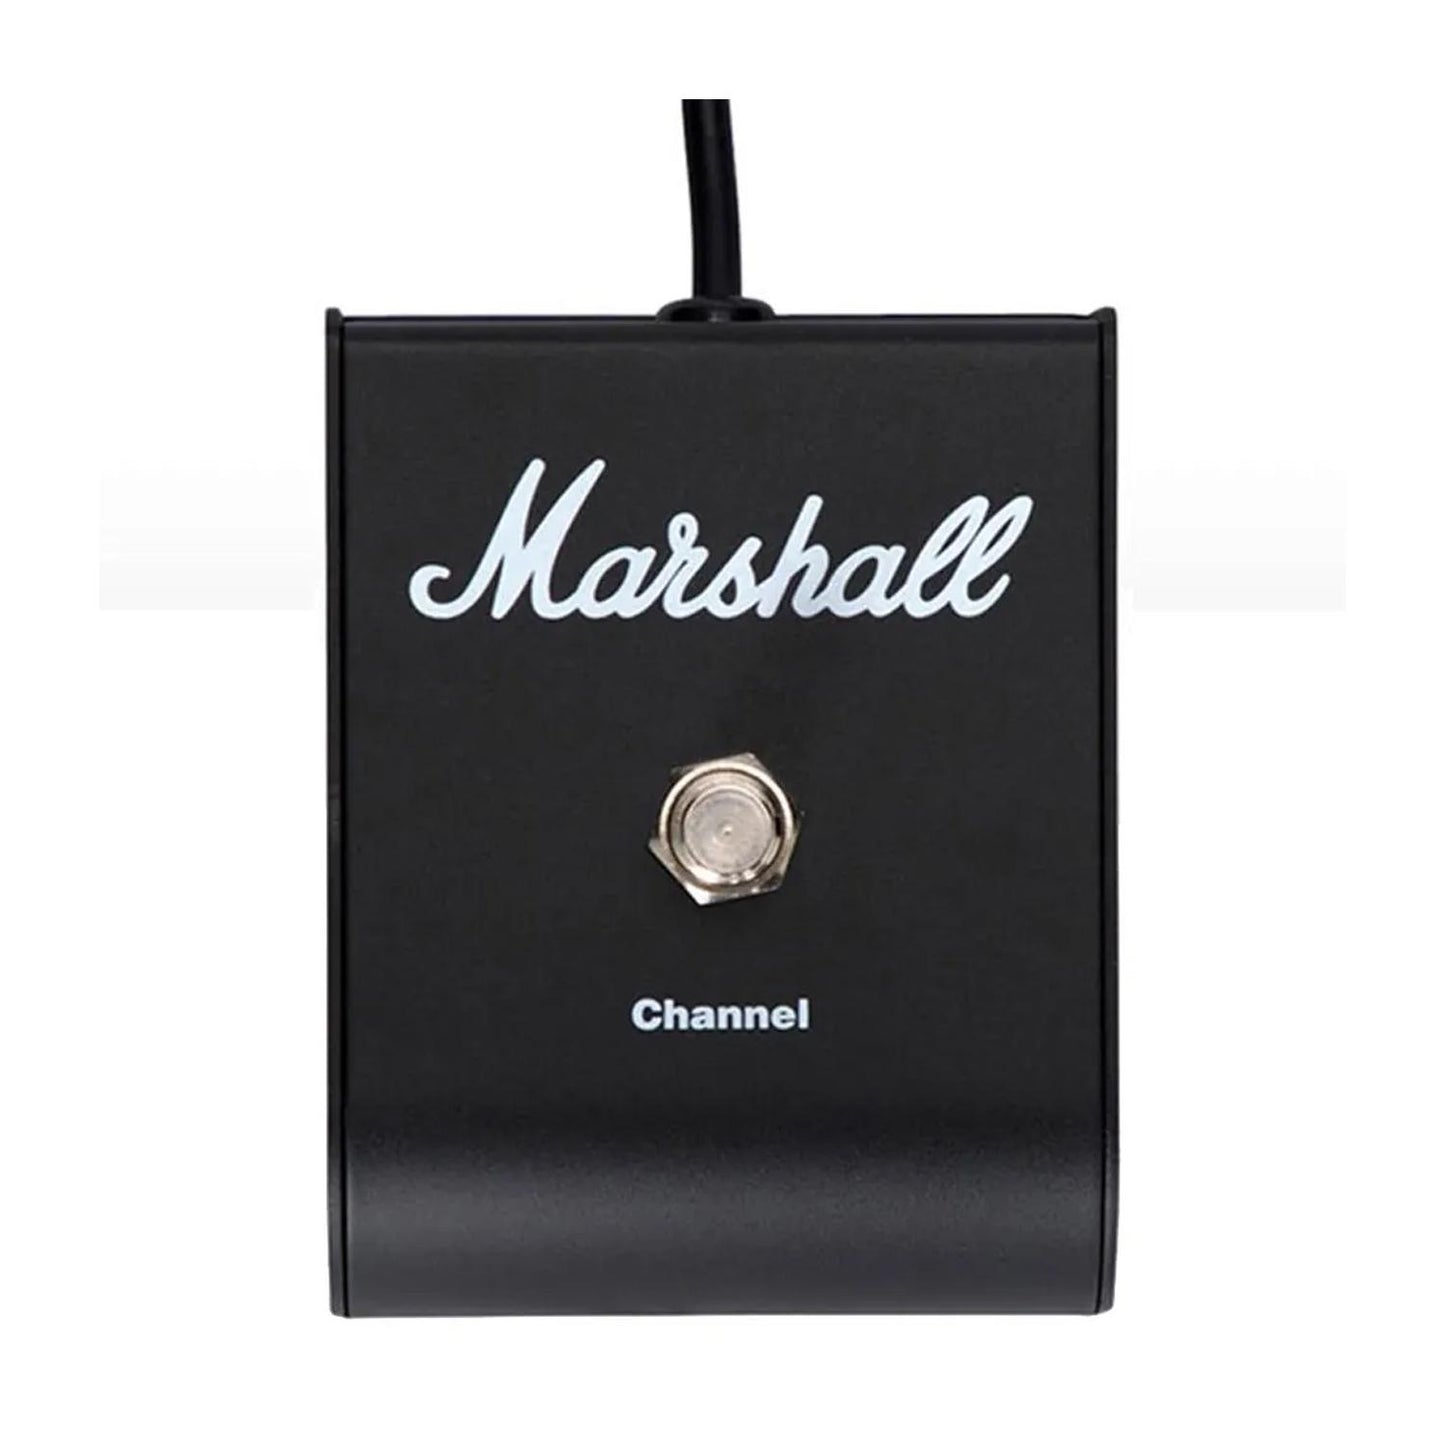 Footswitch PEDL-10008 MARSHALL